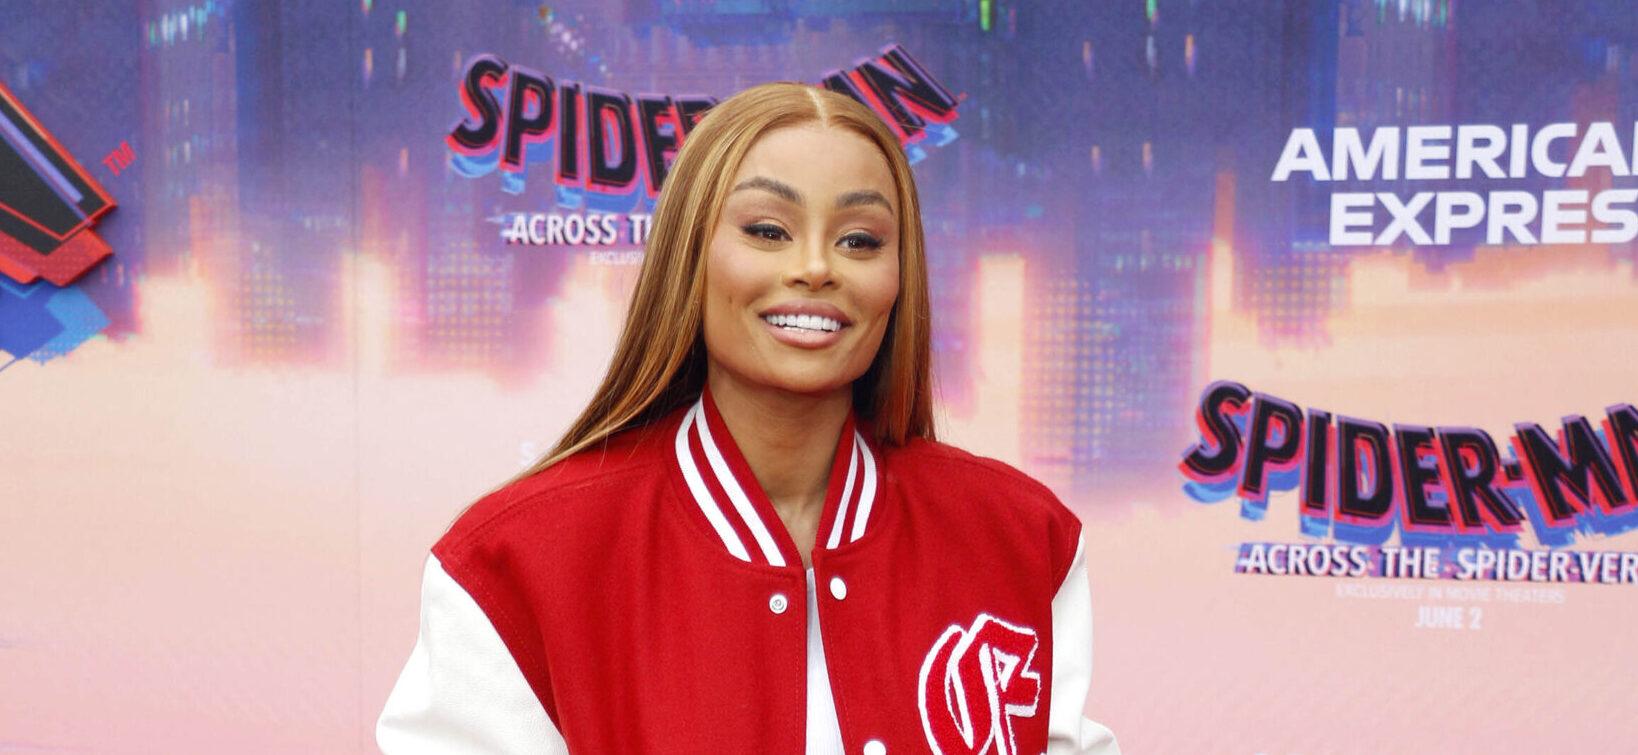 Blac Chyna Signs Massive Apparel Deal With Ethika